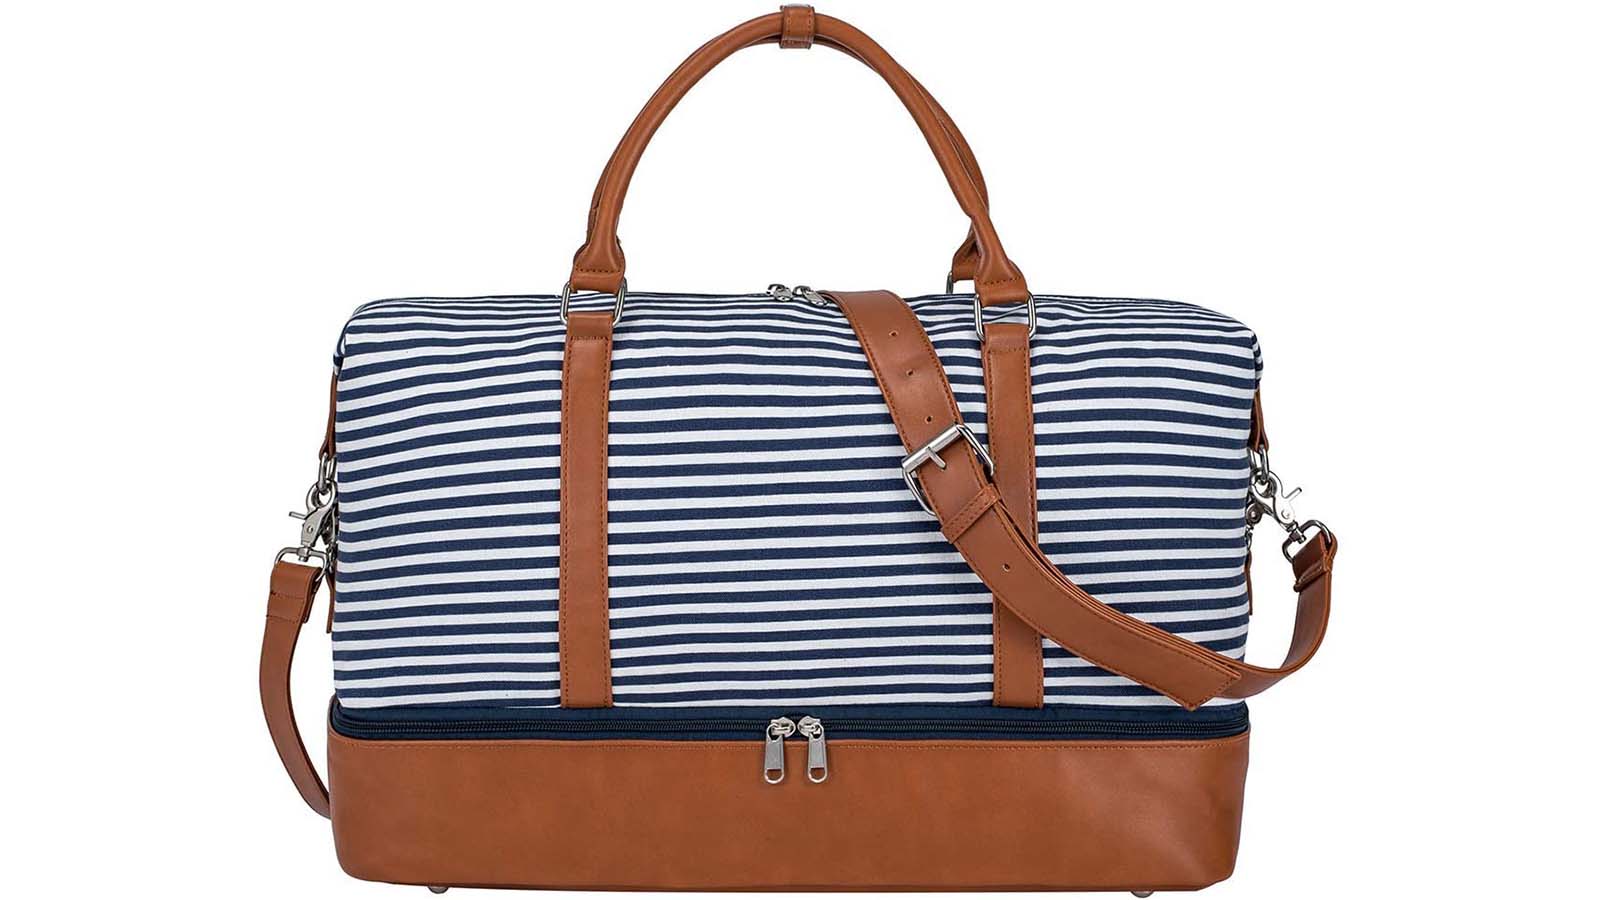 The Weekender Bag in Earth Gray with Silver and Gold Stripes